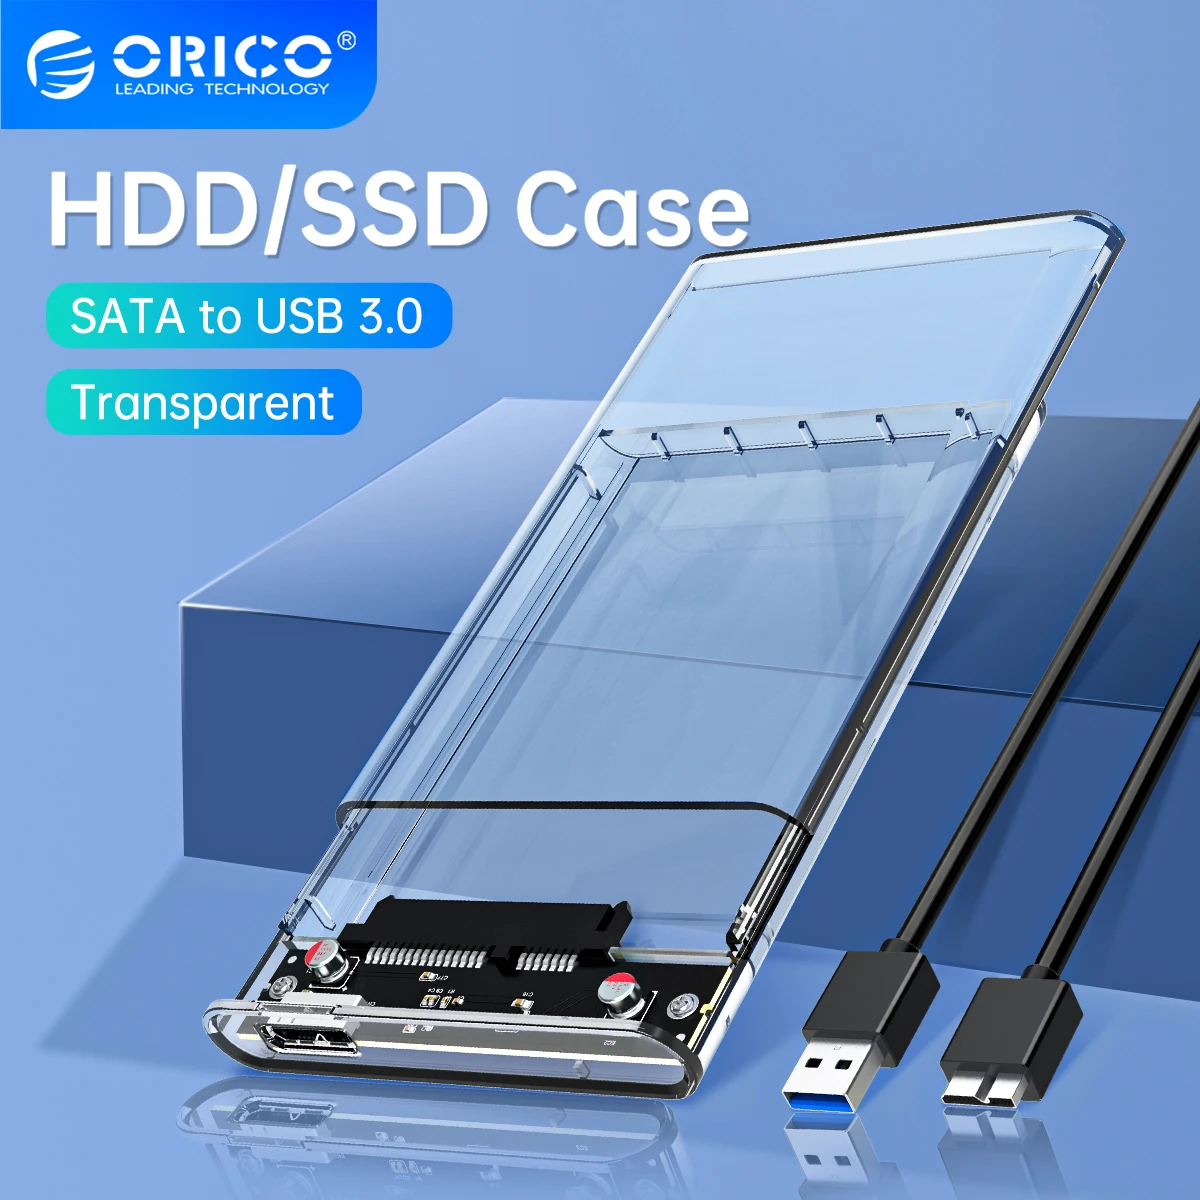 Orico Transparent Hdd Case Sata To Usb 3.0 Hard Drive Case External 2.5'' Enclosure For Hdd Ssd Disk Case Box Support Uasp - Hdd Ssd Enclosure - AliExpress